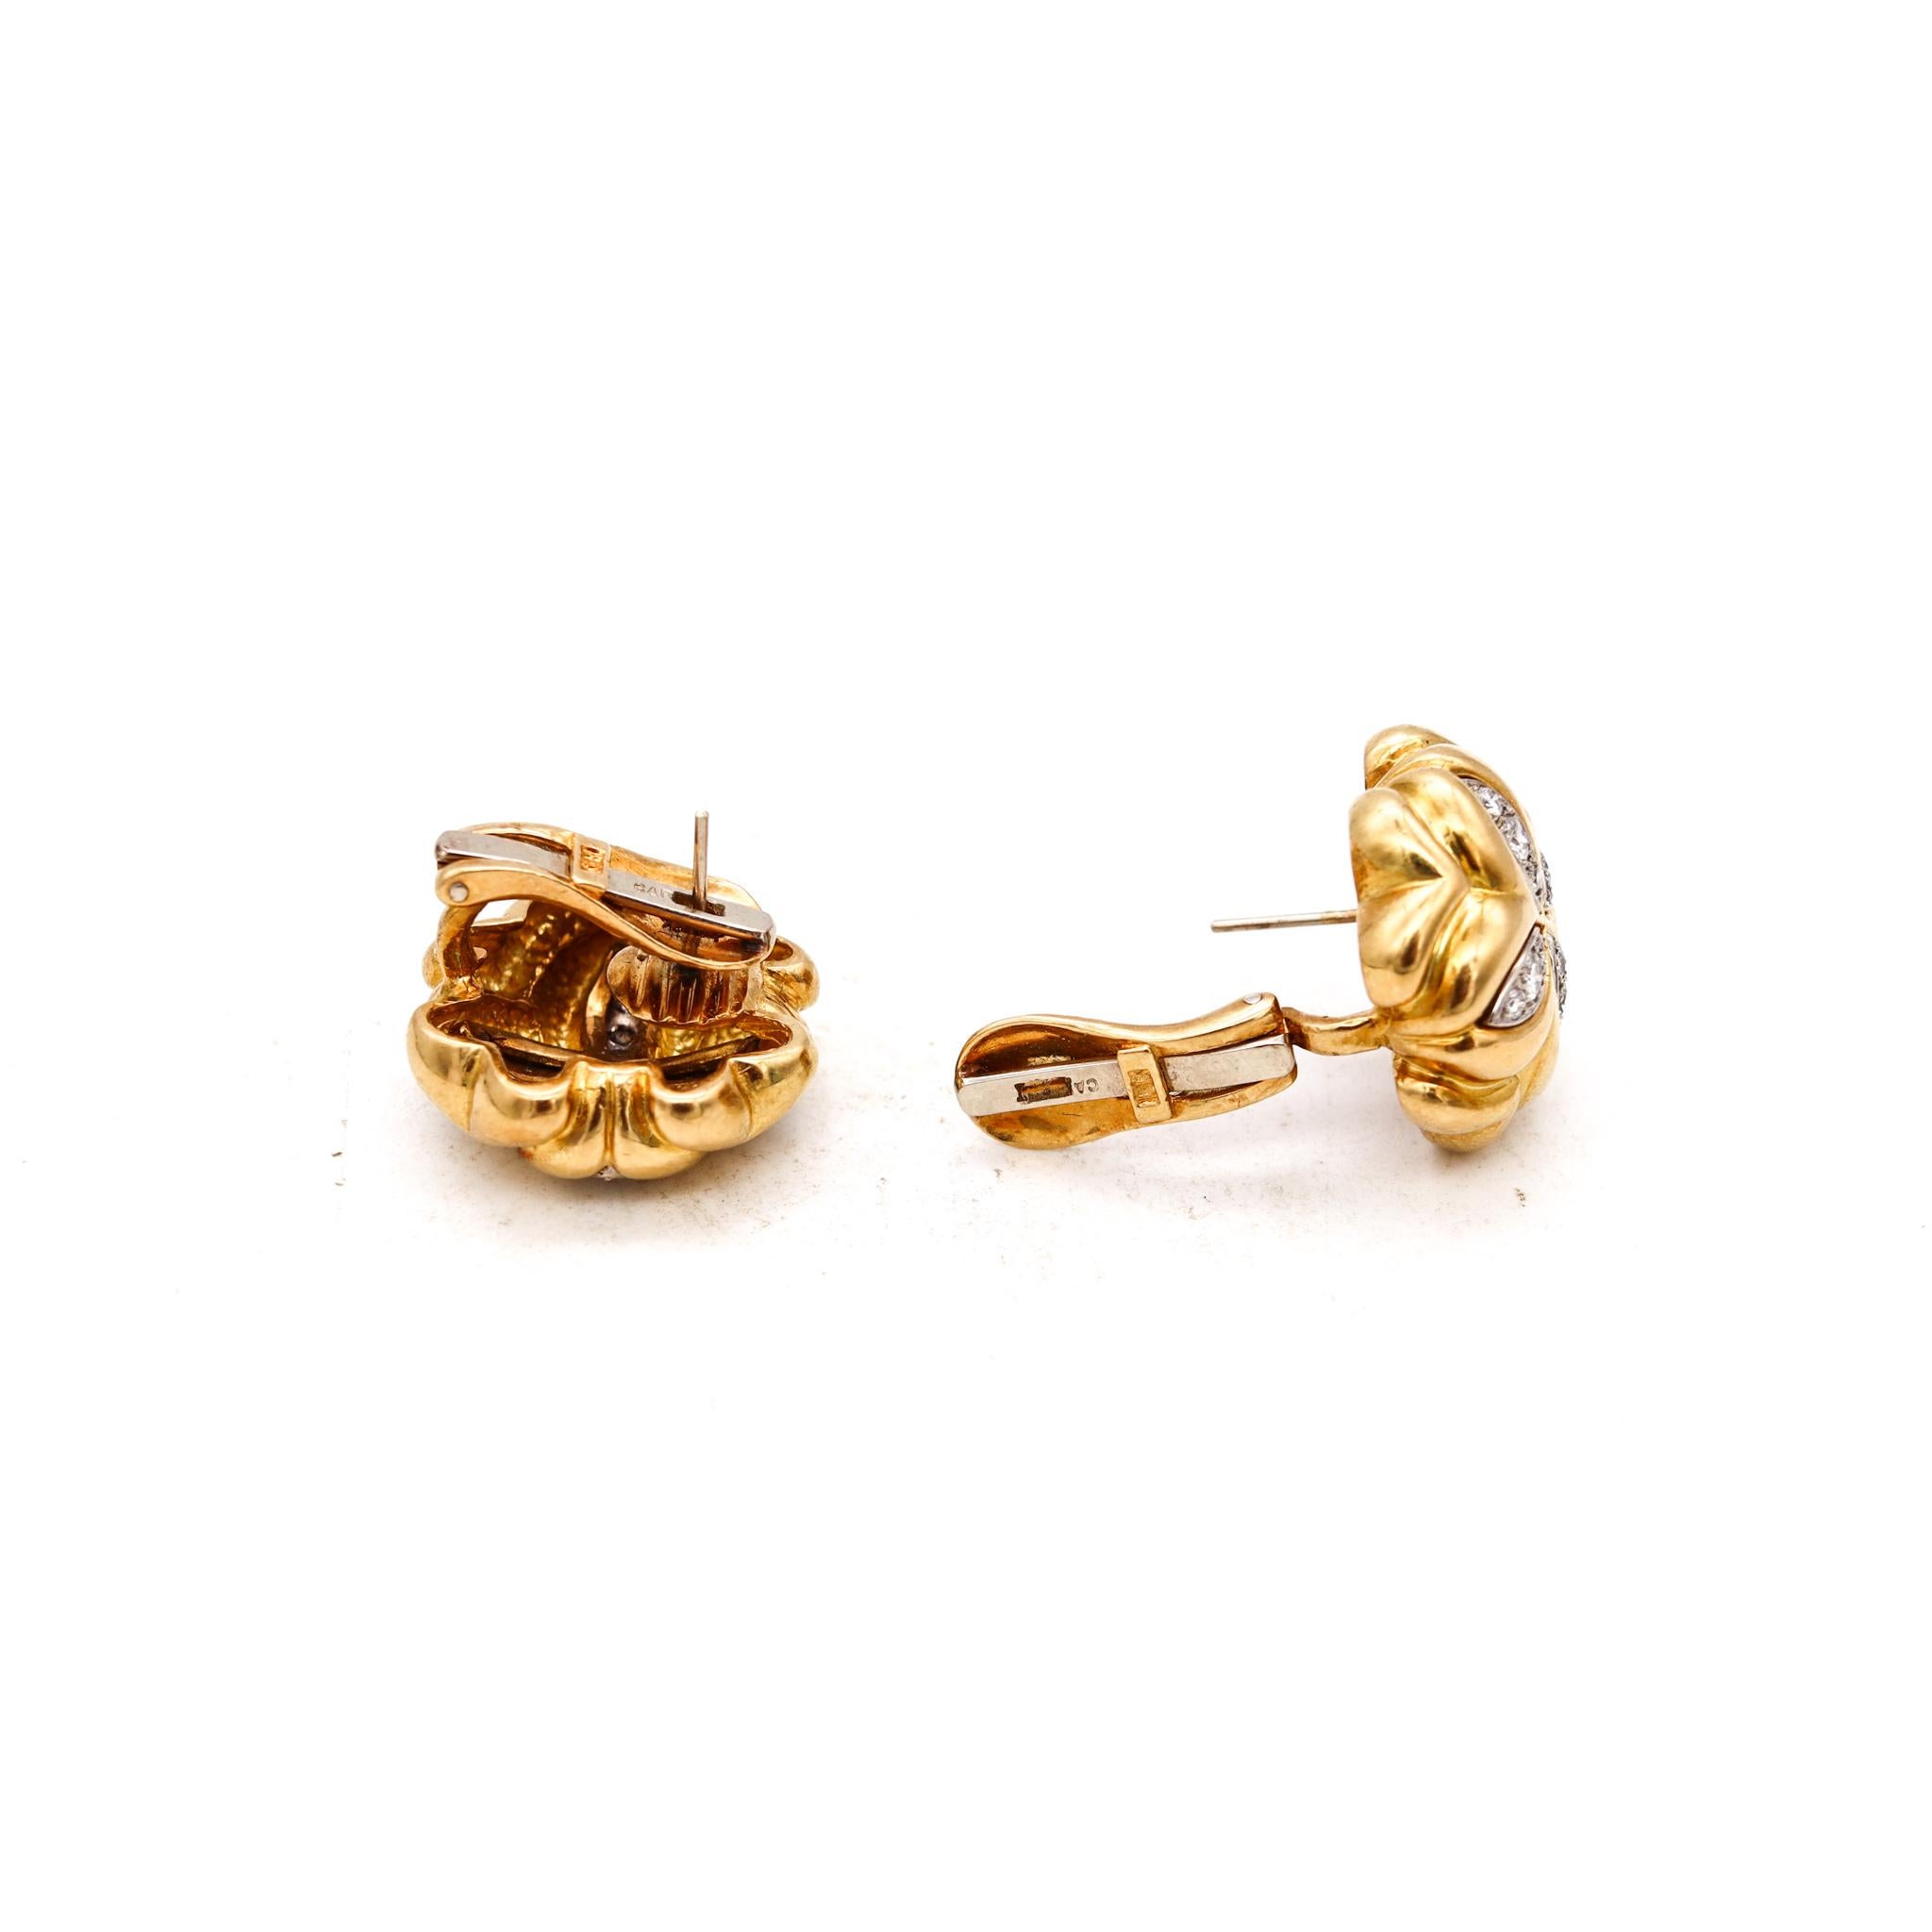 Brilliant Cut Cartier 1970 Pair Of Clovers Clips Earrings In 18Kt Yellow Gold With VS Diamonds For Sale